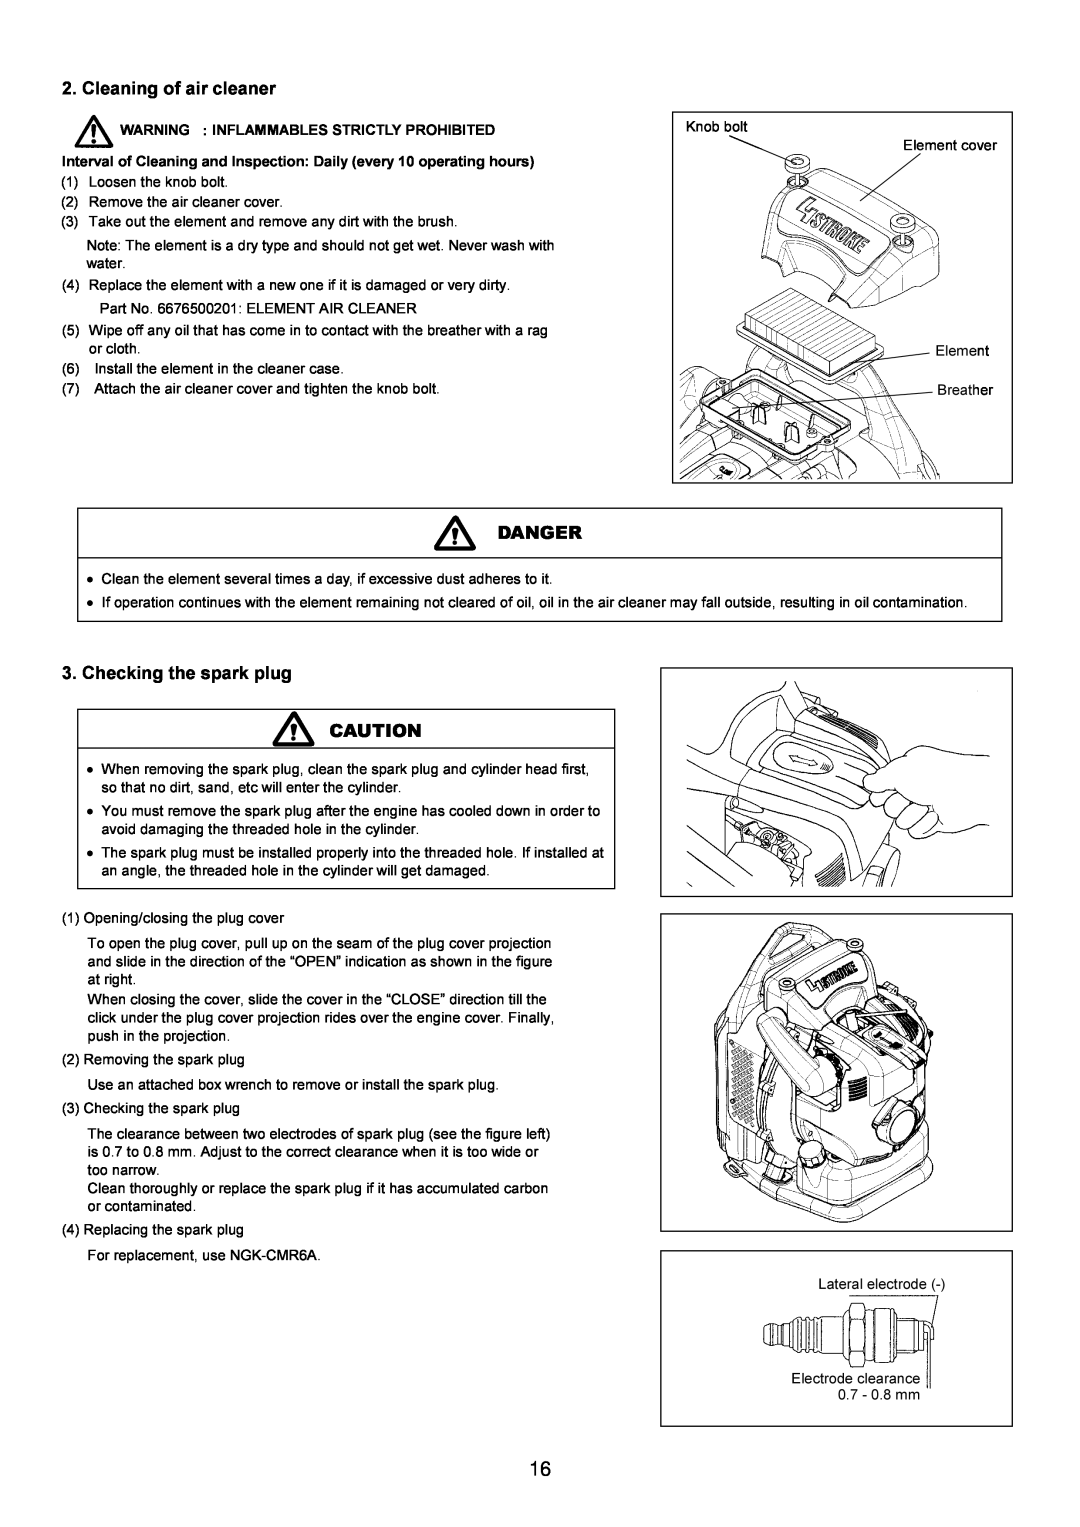 Makita BBX7600CA instruction manual Cleaning of air cleaner, Danger, Checking the spark plug 